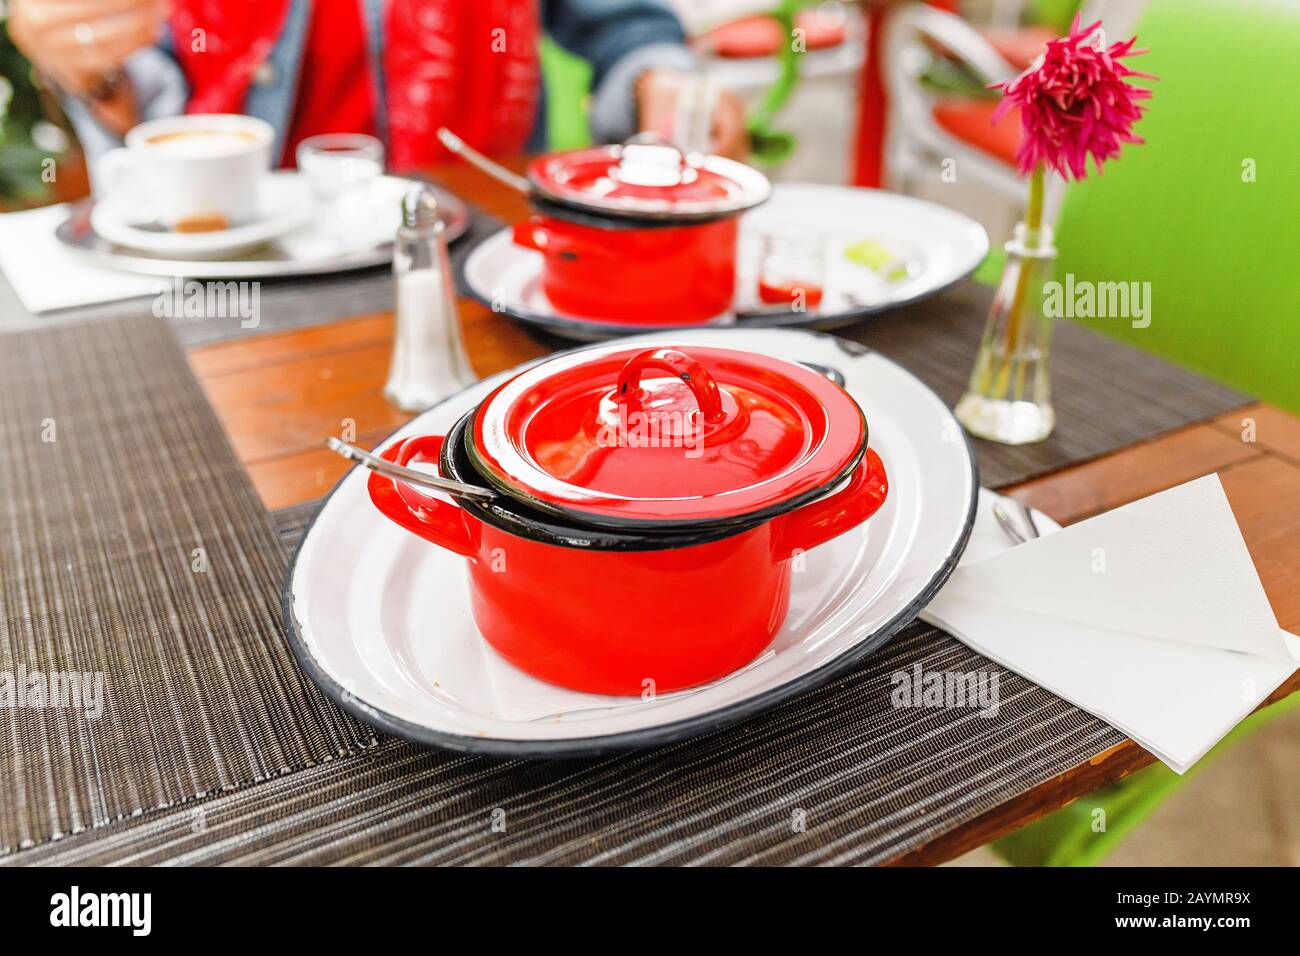 Tasty goulash soup in red pot casserole on a restaurant table Stock Photo